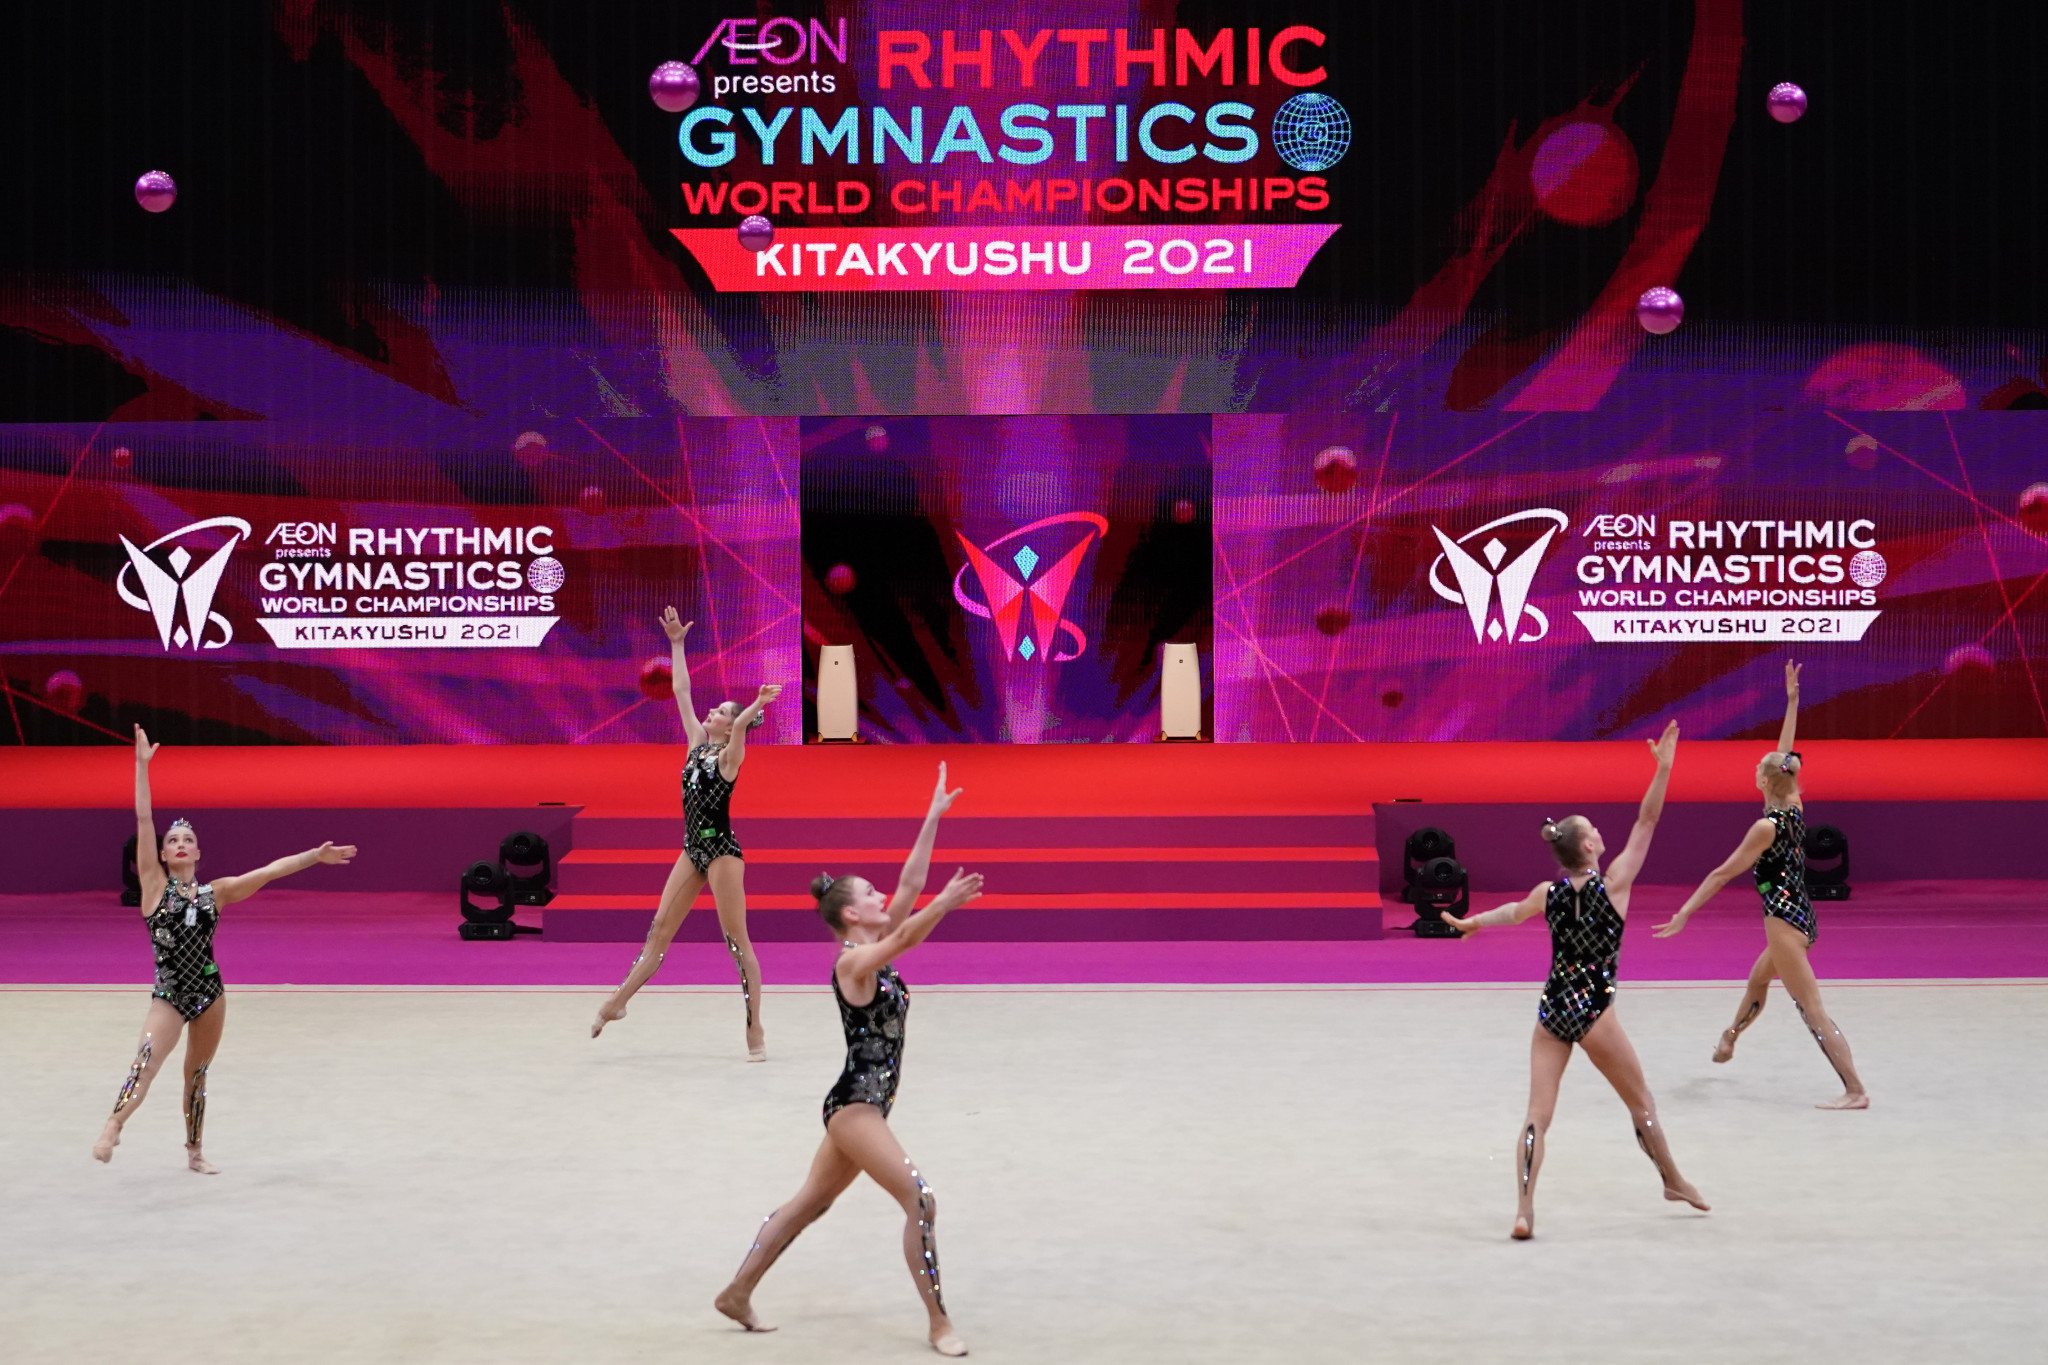 The Russian Gymnastics Federation scored 88.350 to win the group all-around final at the Rhythmic Gymnastics World Championships ©Getty Images